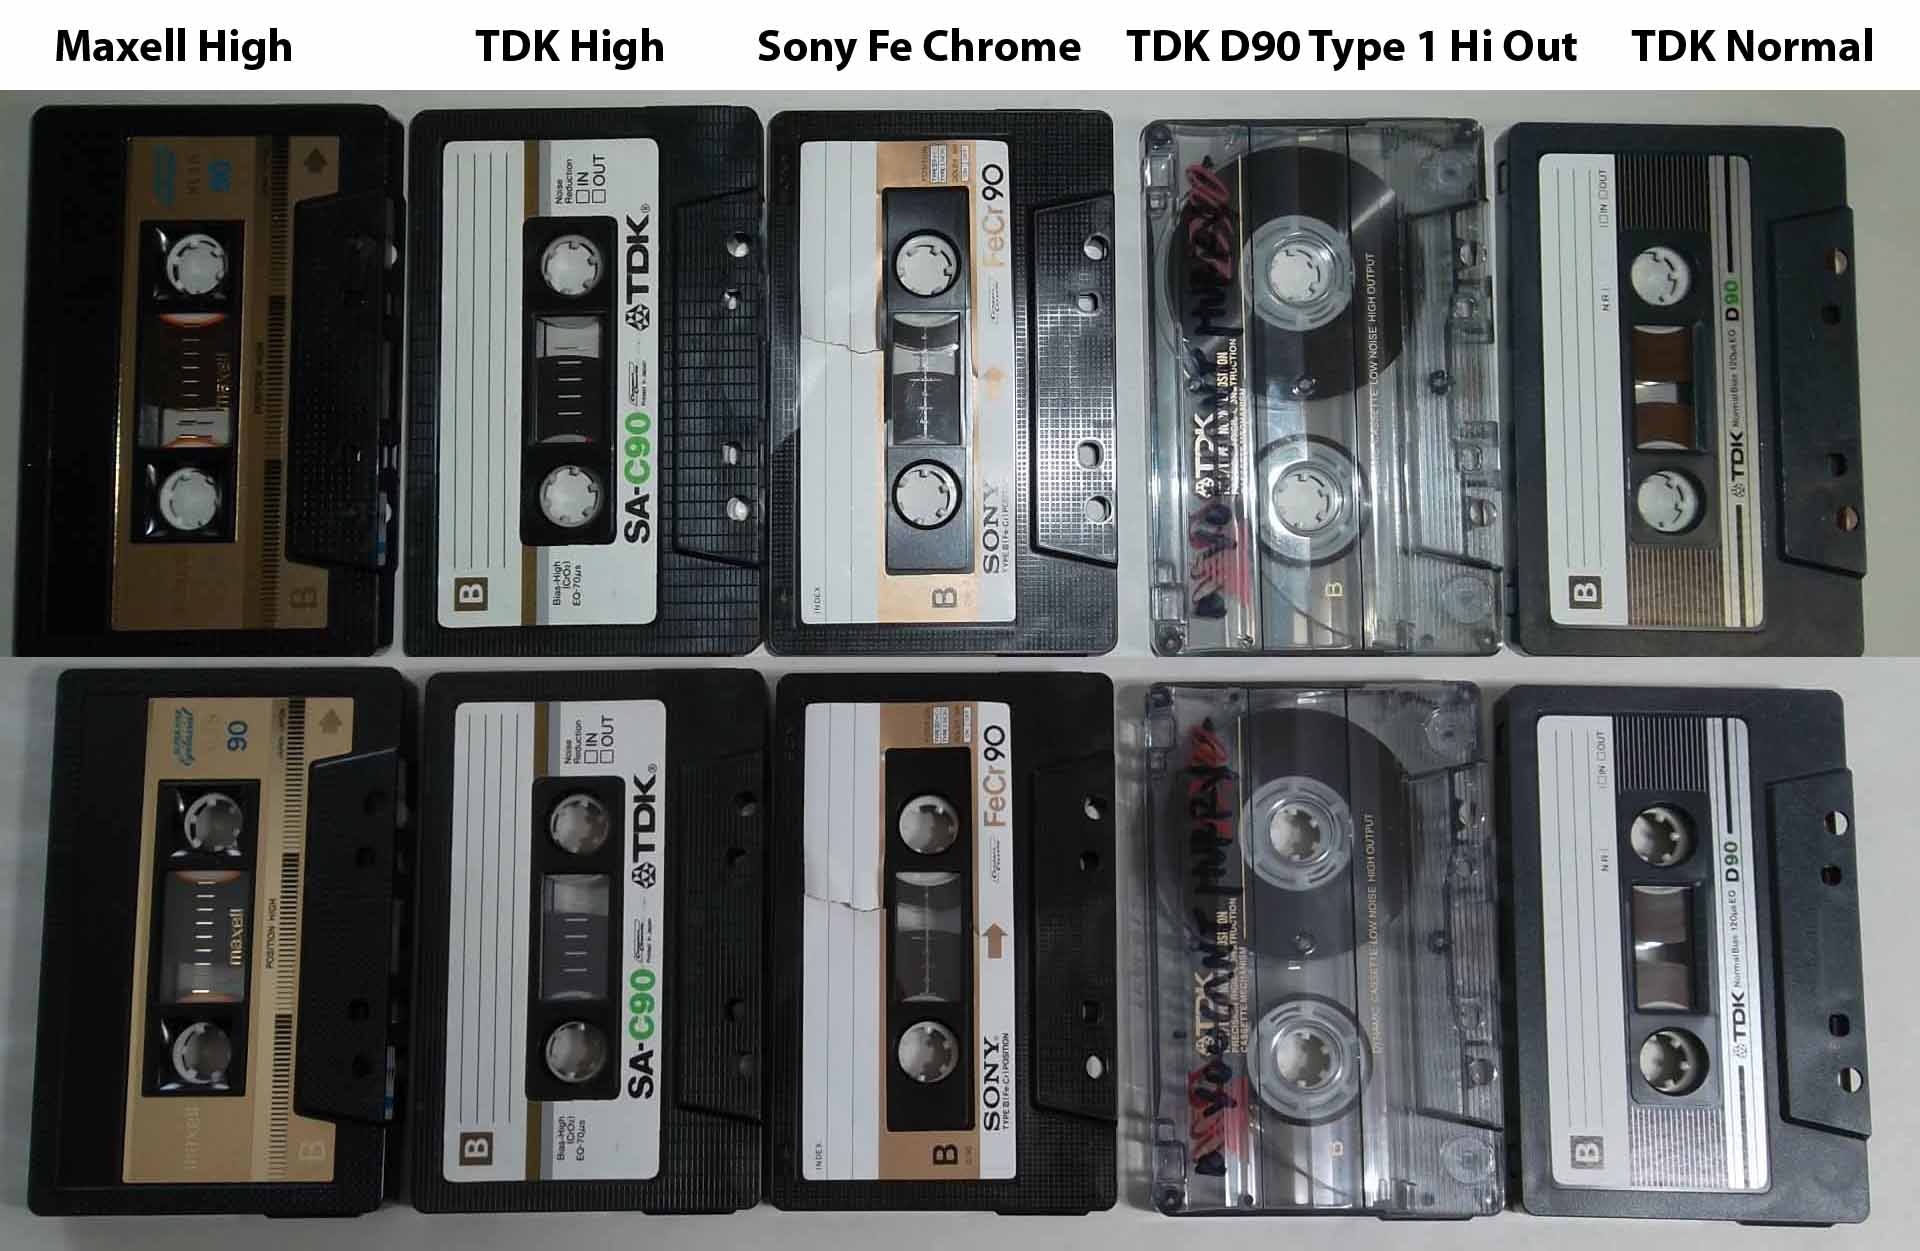 Maxell cassette tapes - which are the better ones?